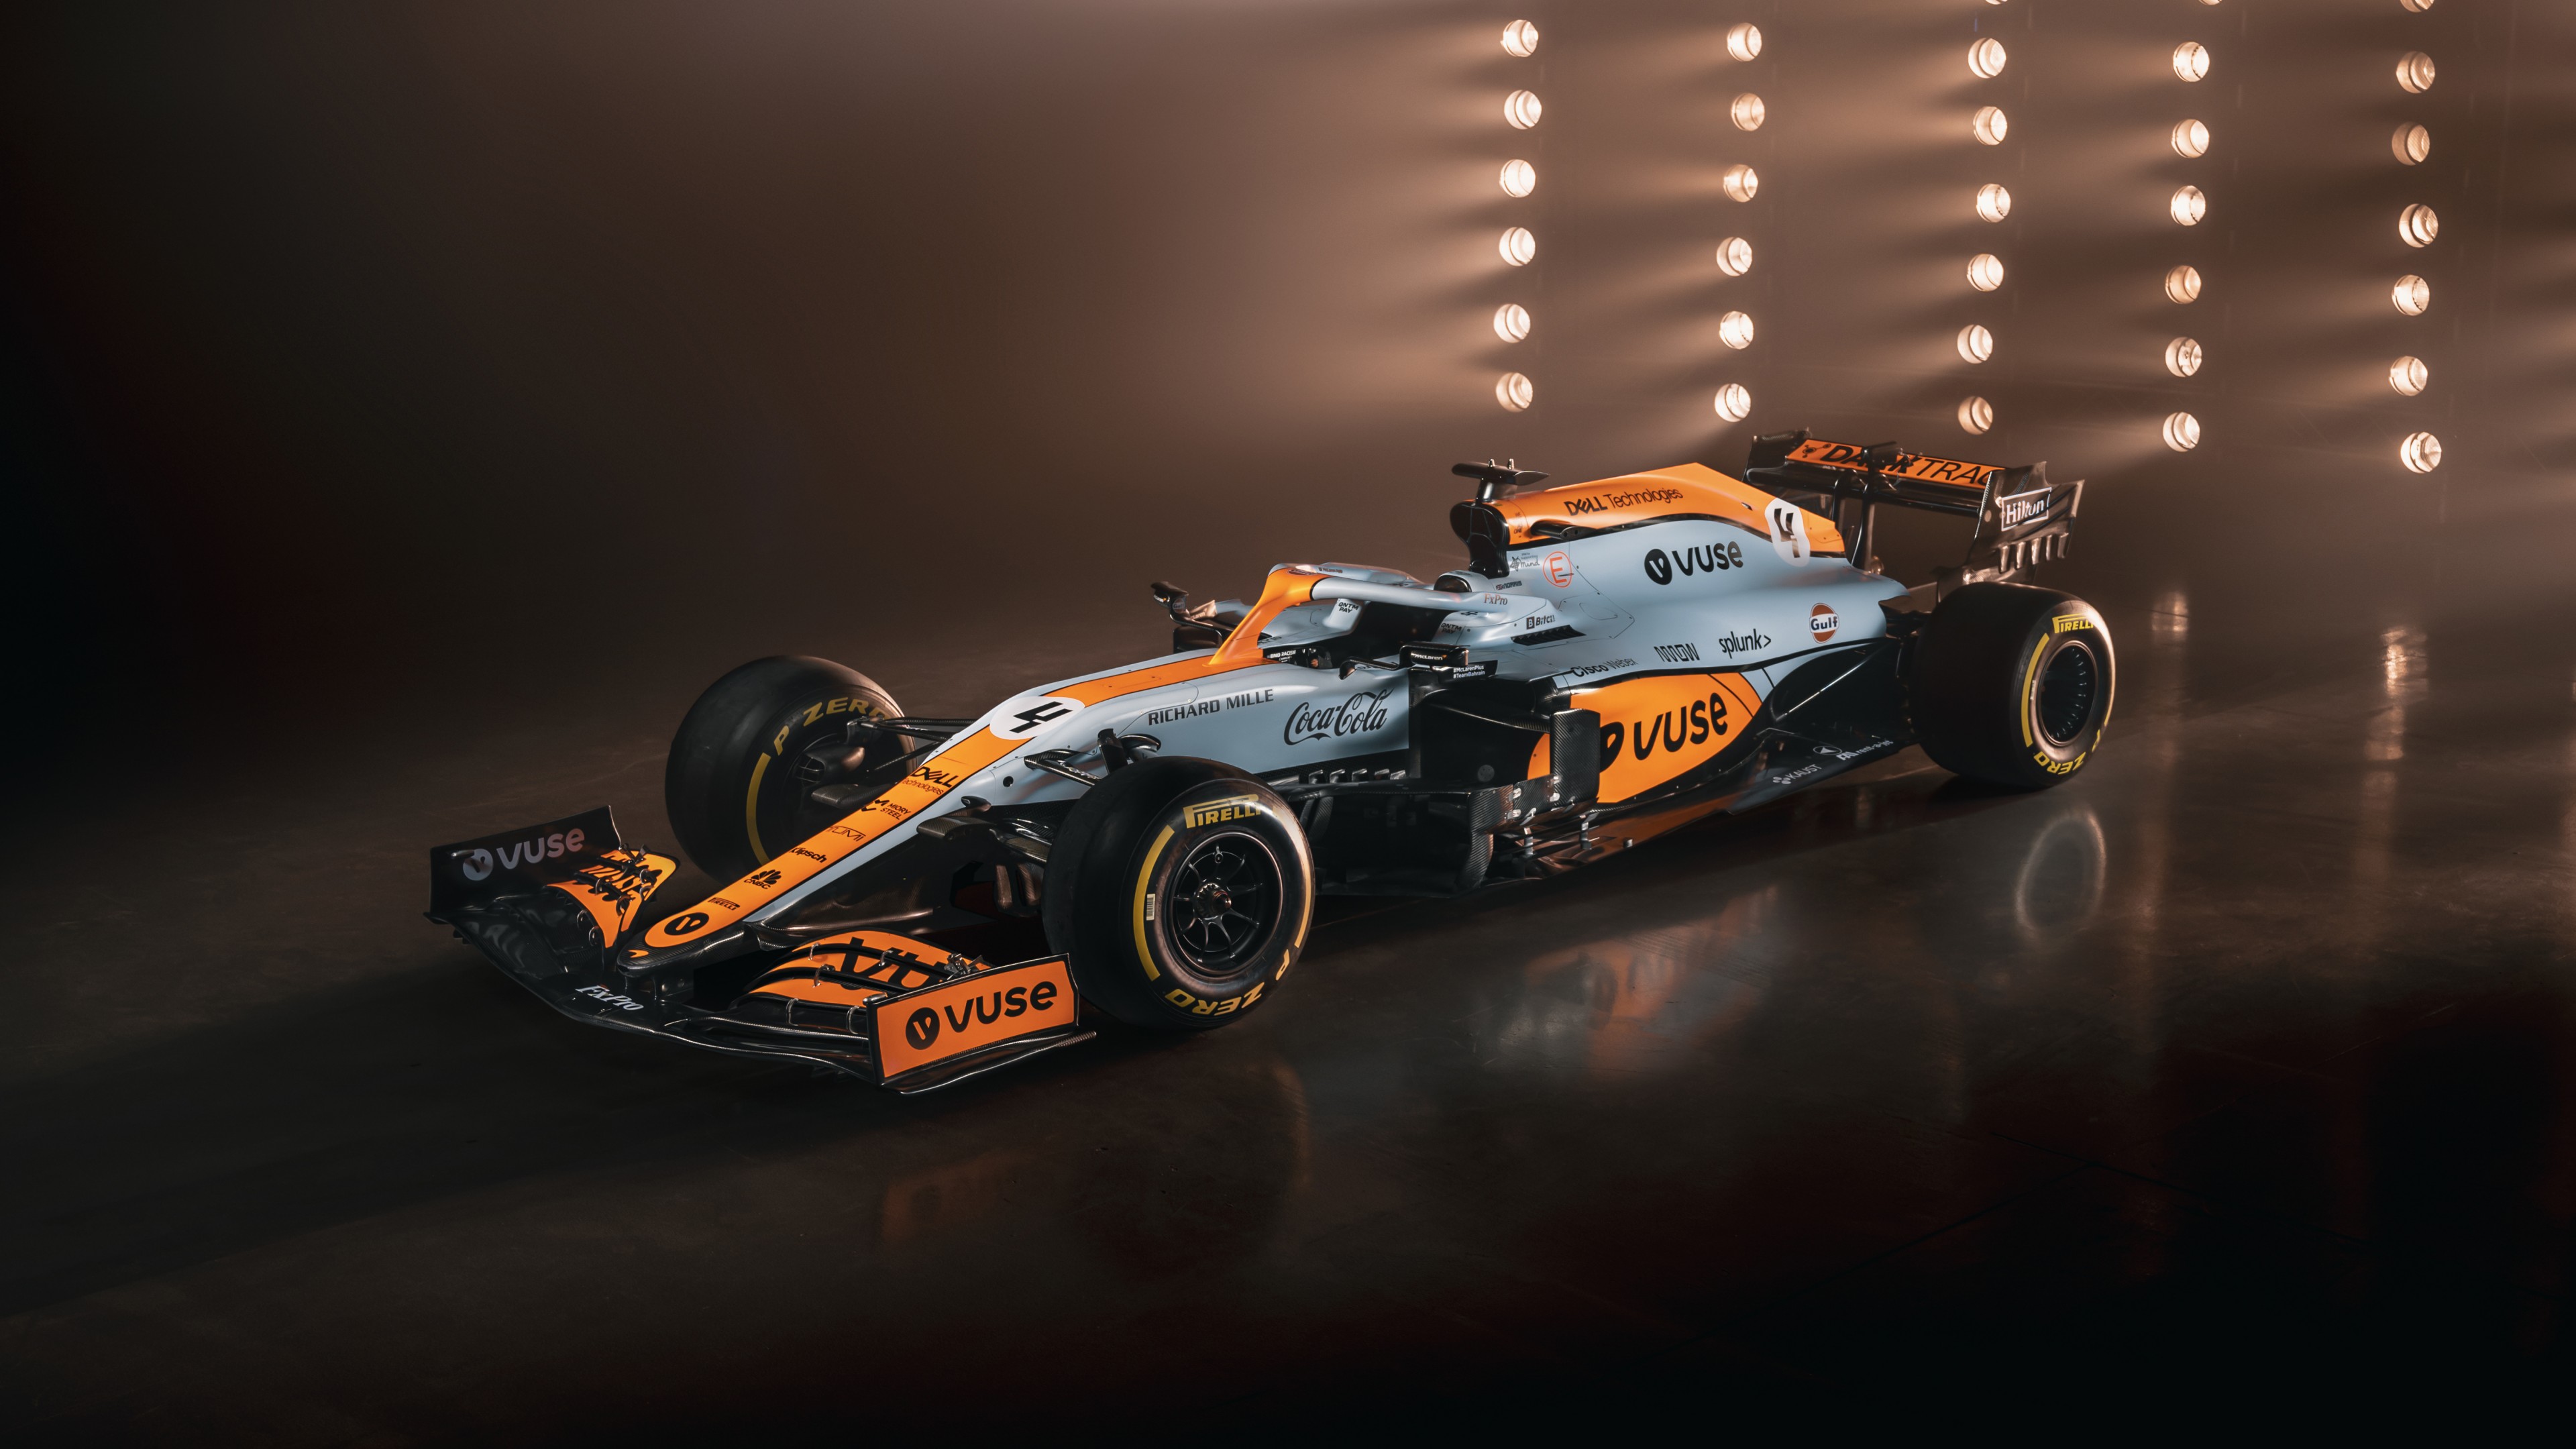 Free download McLaren MCL35M with a special Gulf livery 2021 5K 2 Wallpaper HD [3840x2160] for your Desktop, Mobile & Tablet. Explore McLaren Gulf Wallpaper. Gulf Coast Wallpaper, Mclaren Wallpaper, Mclaren F1 Wallpaper